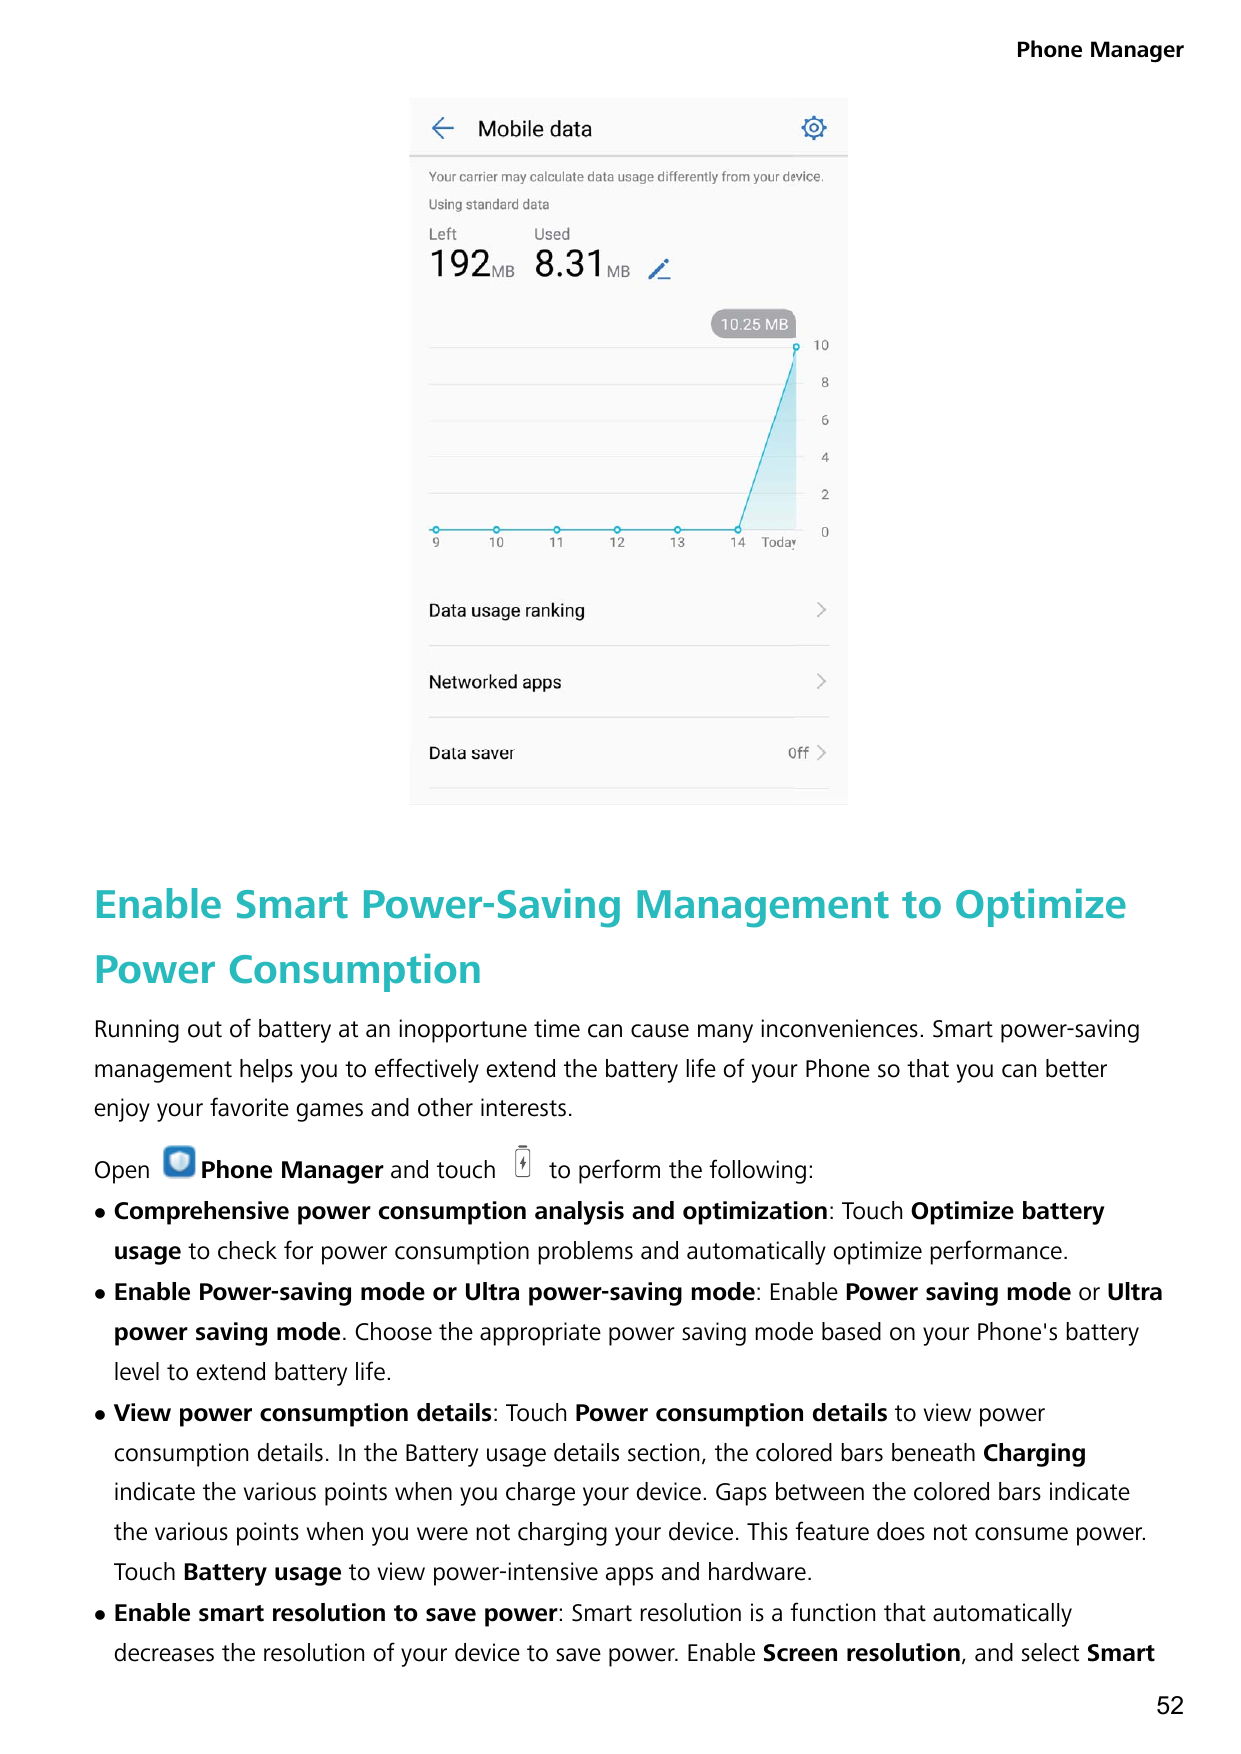 Phone ManagerEnable Smart Power-Saving Management to OptimizePower ConsumptionRunning out of battery at an inopportune time can 